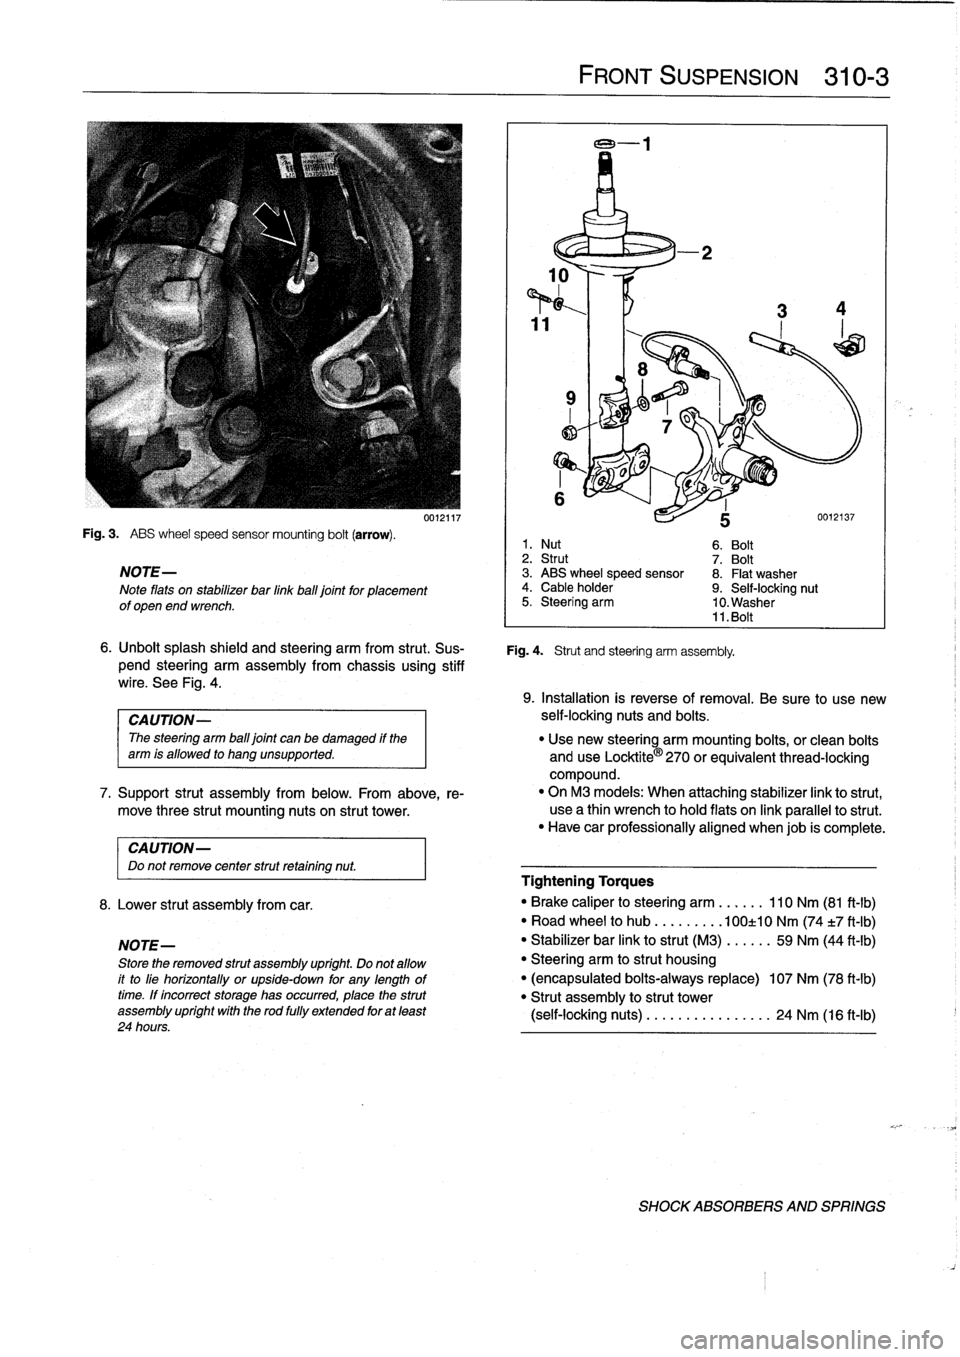 BMW 323i 1998 E36 Owners Manual 
Fig
.
3
.

	

ABS
wheel
speed
sensor
mounting
bolt
(arrow)
.

NOTE-

Note
flats
on
stabilizer
bar
linkball
joint
for
placement
of
open
end
wrench
.

CAUTION-
Do
not
remove
center
strut
retaining
nut
